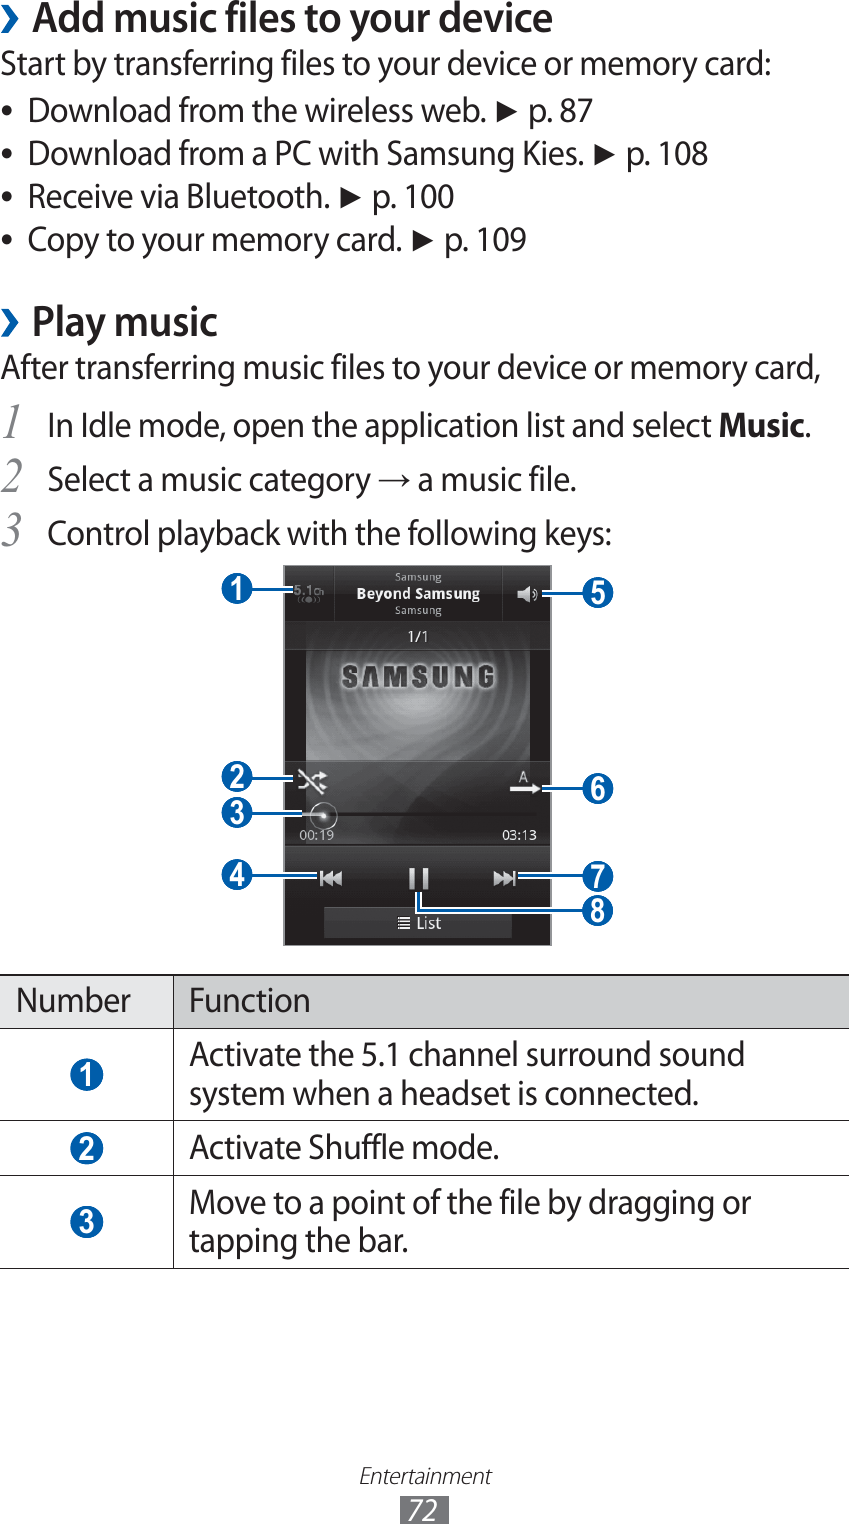 Entertainment72Add music files to your device ›Start by transferring files to your device or memory card:Download from the wireless web.  ●► p. 87Download from a PC with Samsung Kies.  ●► p. 108Receive via Bluetooth.  ●► p. 100Copy to your memory card.  ●► p. 109Play music ›After transferring music files to your device or memory card,In Idle mode, open the application list and select 1 Music.Select a music category 2 → a music file.Control playback with the following keys:3  5  6  1  3  2  4   7  8 Number Function 1 Activate the 5.1 channel surround sound system when a headset is connected. 2 Activate Shuffle mode. 3 Move to a point of the file by dragging or tapping the bar.